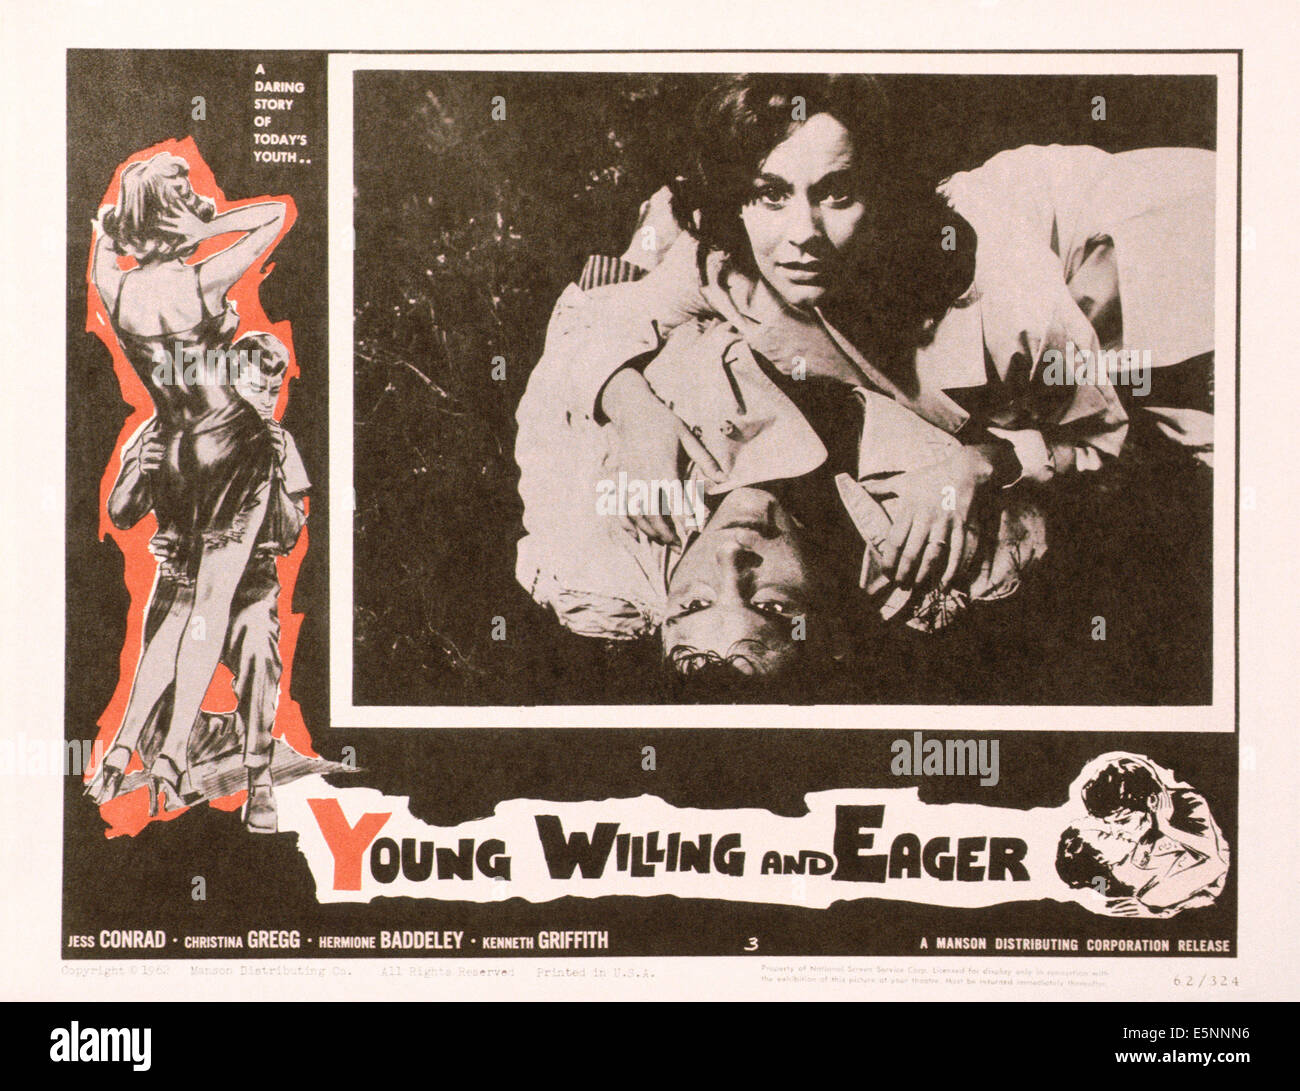 RAG DOLL, (aka YOUNG, WILLING AND EAGER), US lobbycard, from left: Jess Conrad, Christina Gregg, 1961 Stock Photo